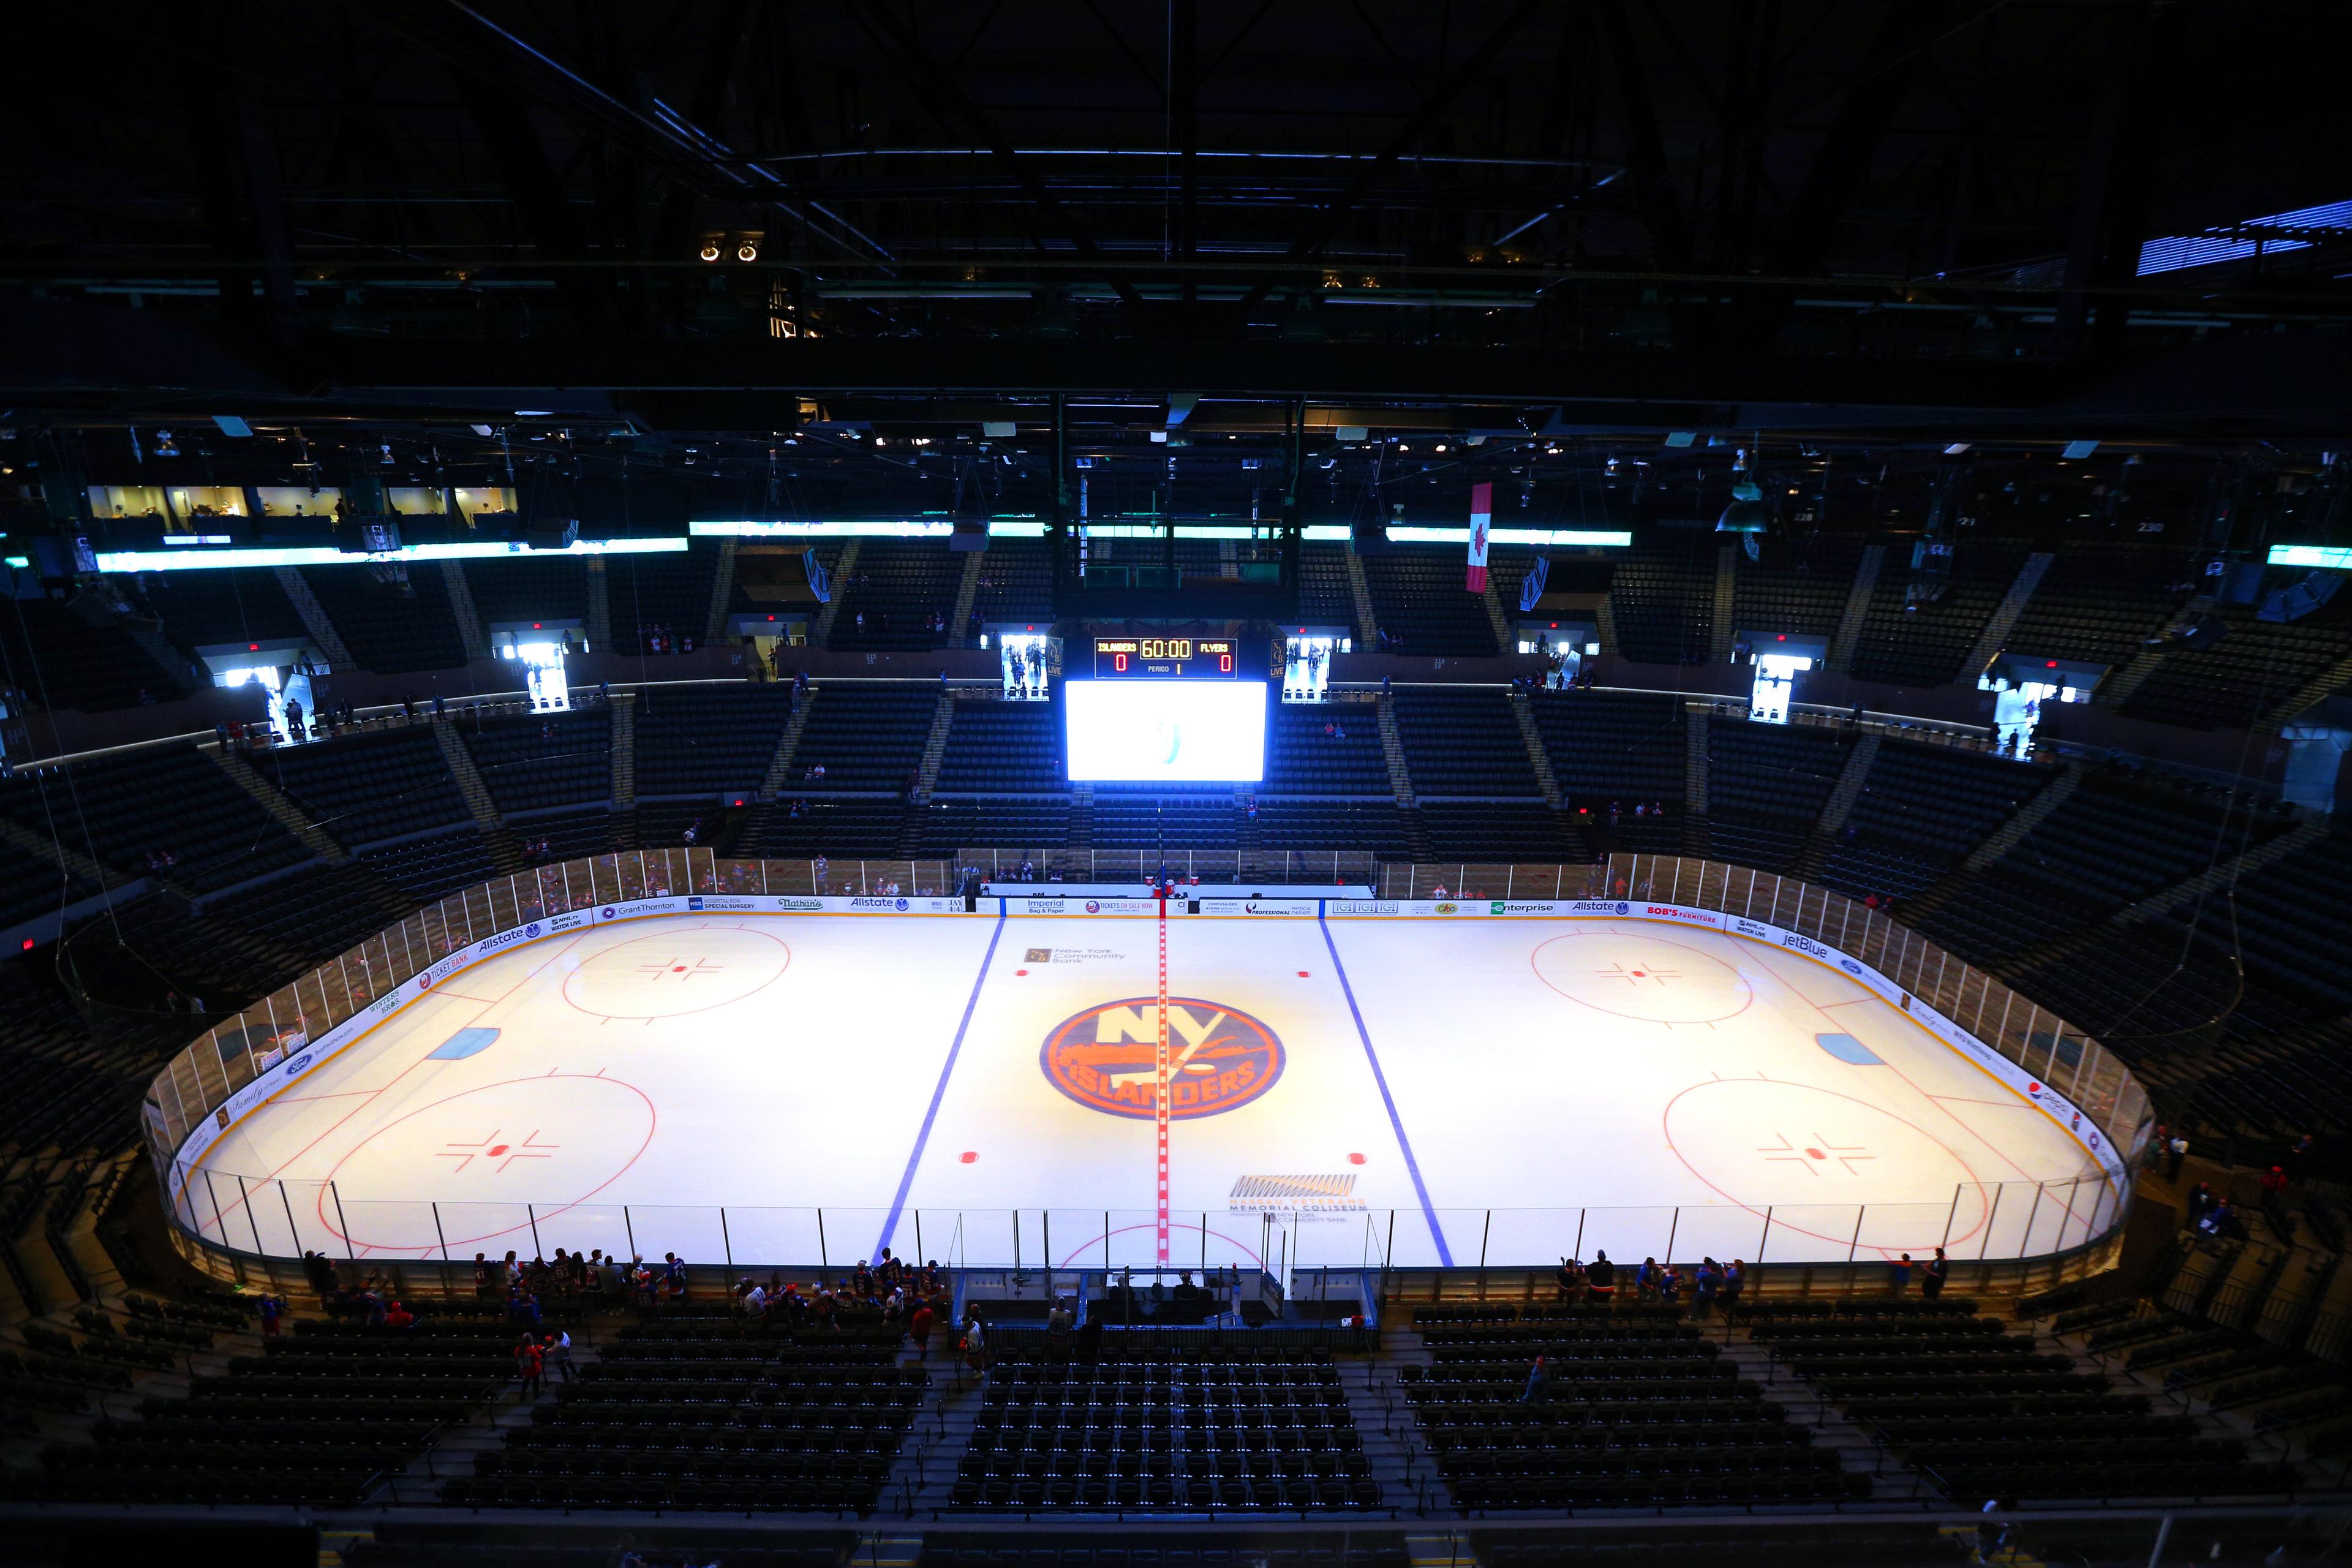 General view of Nassau Coliseum with Islanders logo at center ice / USA TODAY